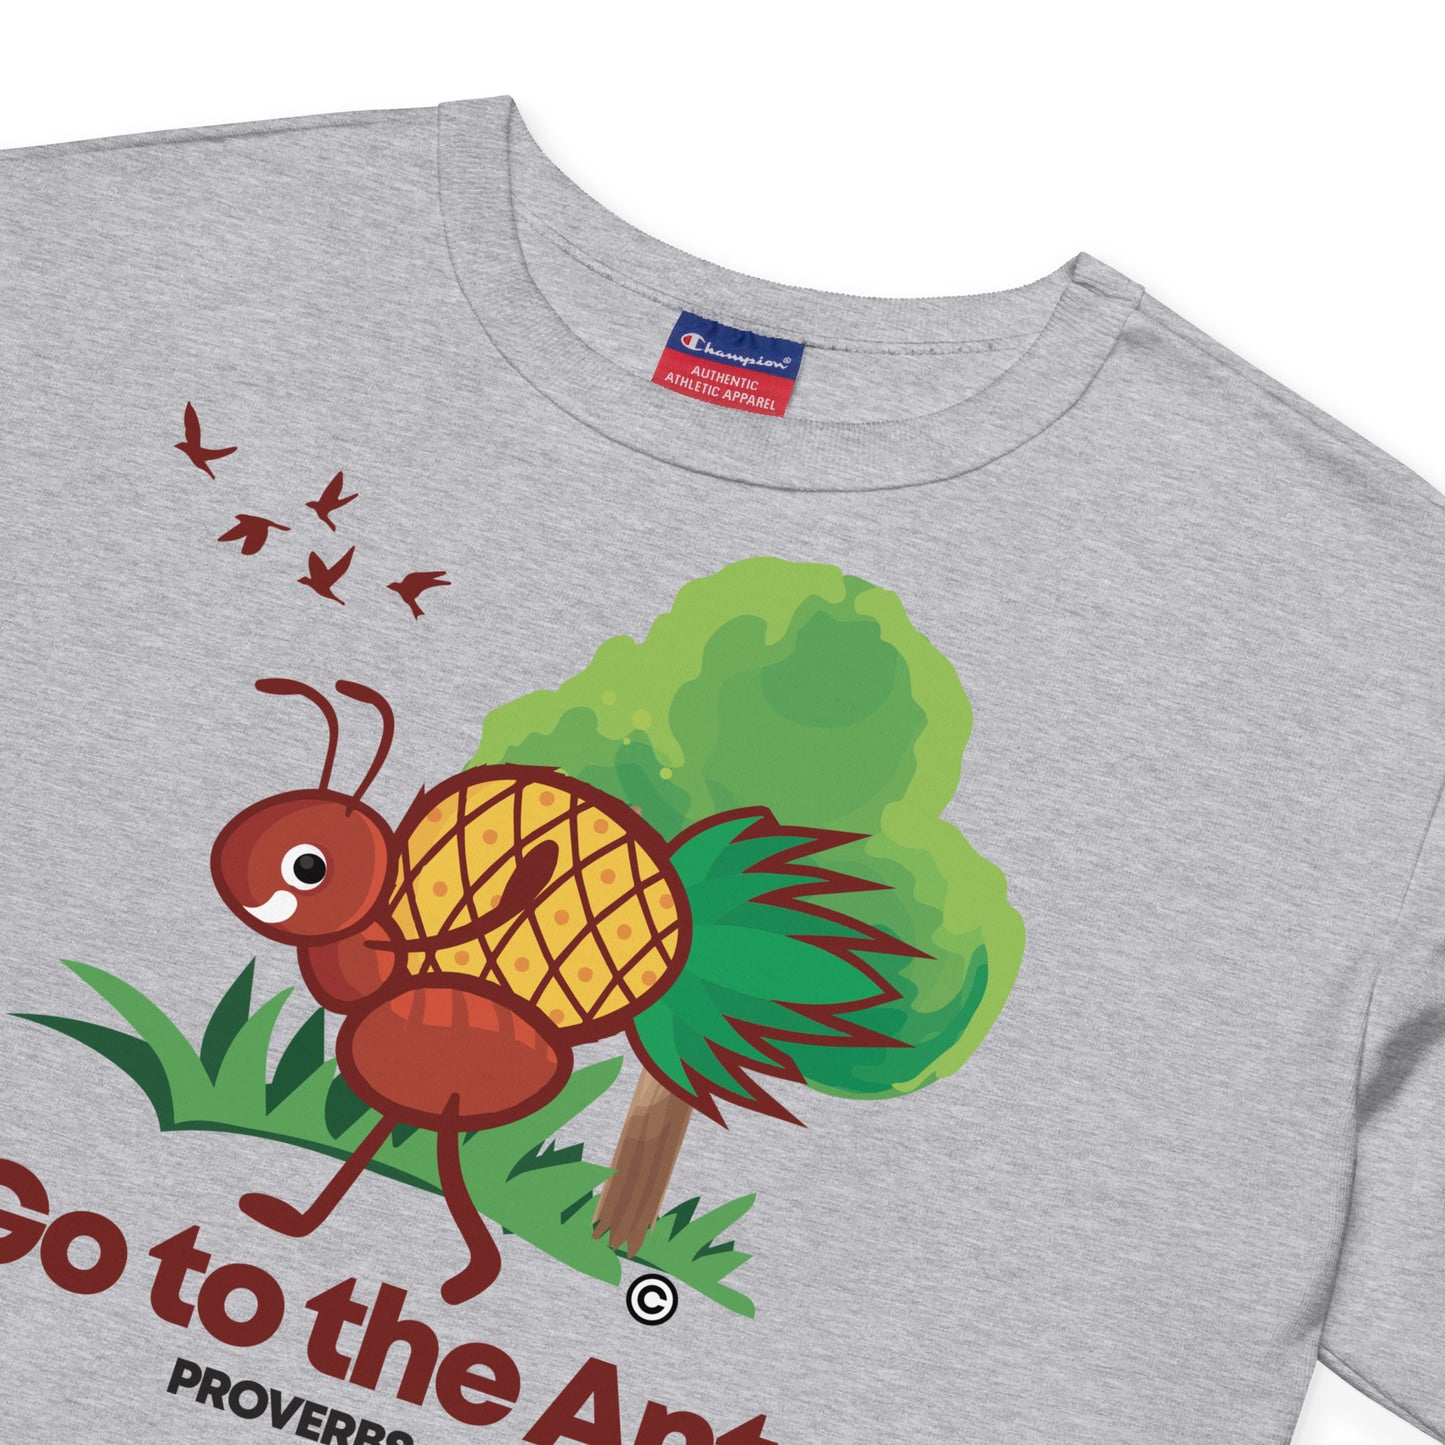 Go to the Ant Champion Crop Top